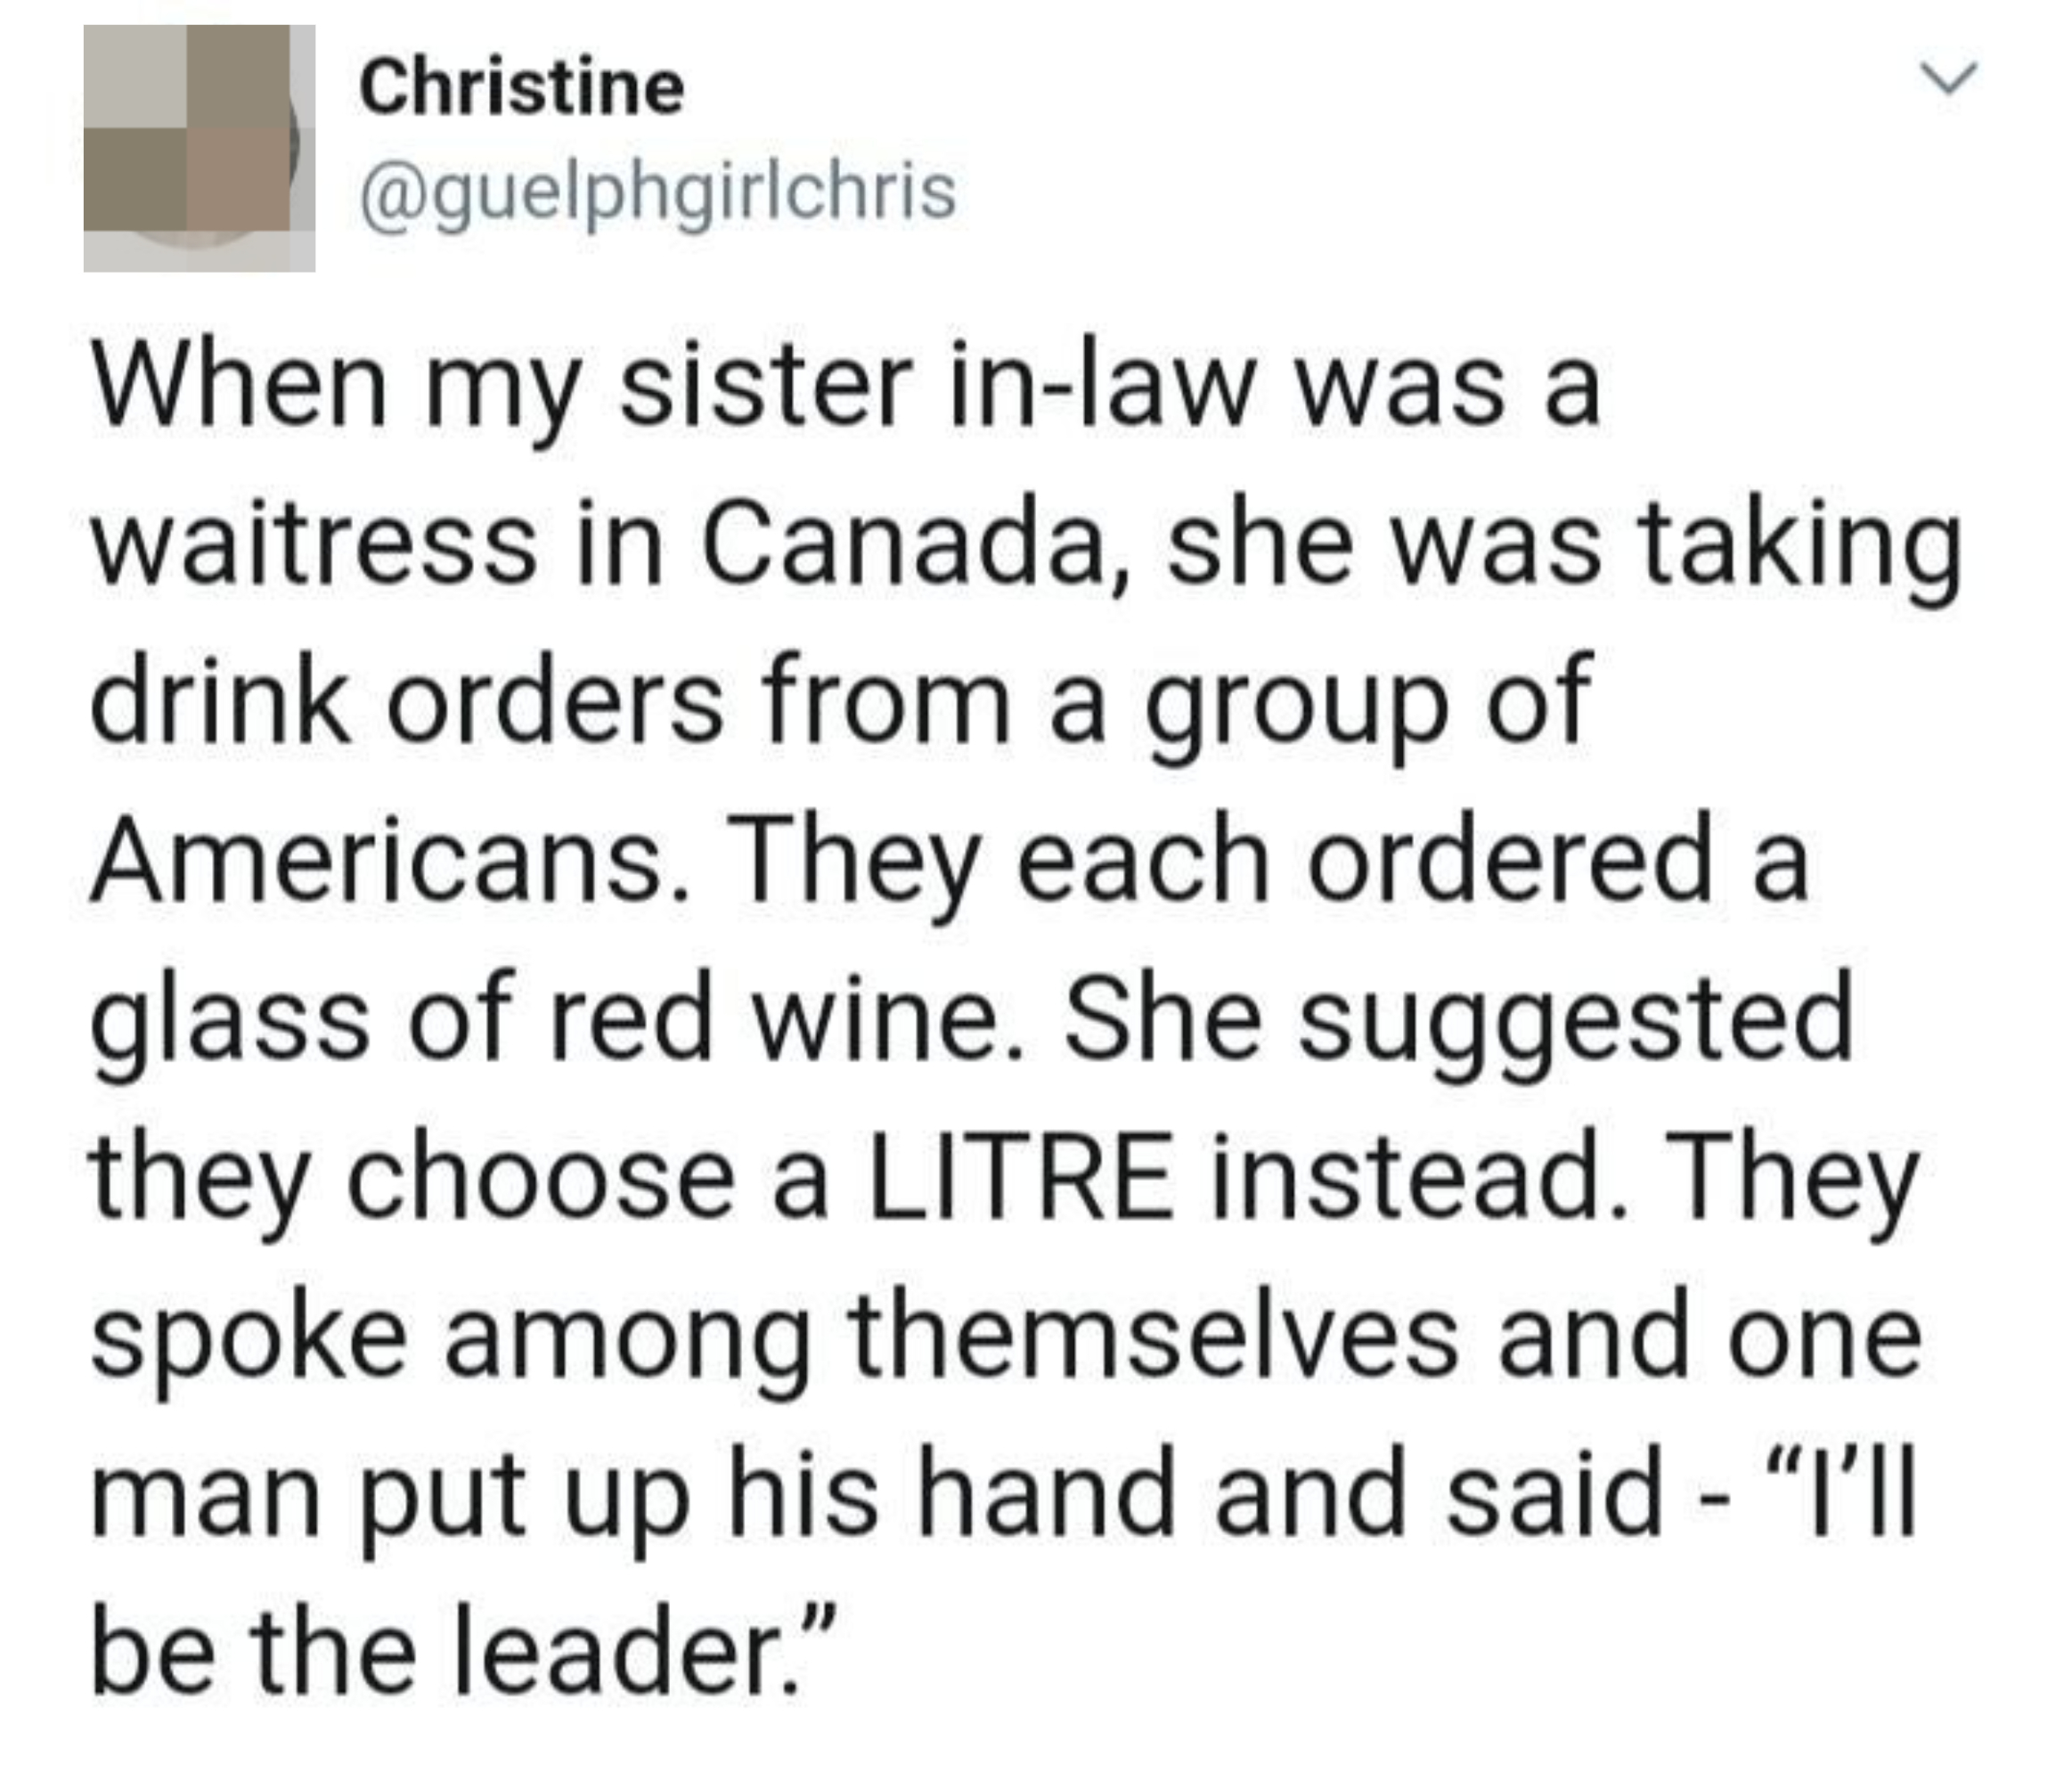 Tweet: &quot;When my sister in-law was a waitress in Canada, she was taking drink orders from a group of Americans who each ordered a glass of red wine; she suggested they choose a LITRE instead, so one man raised his hand and said &#x27;I’ll be the leader&#x27;”